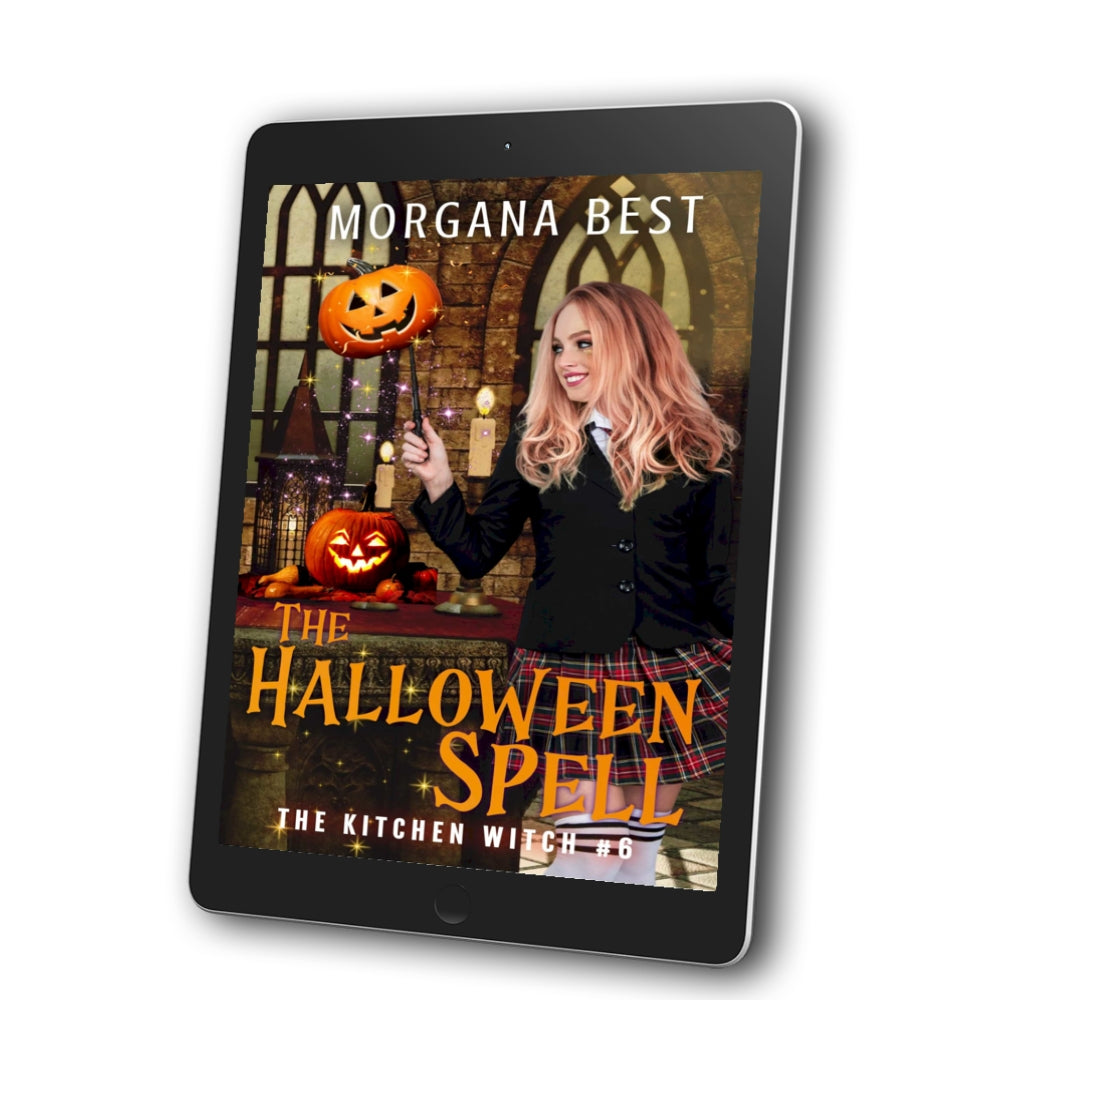 The Halloween Spell ebook cozy mystery morgana best paranormal